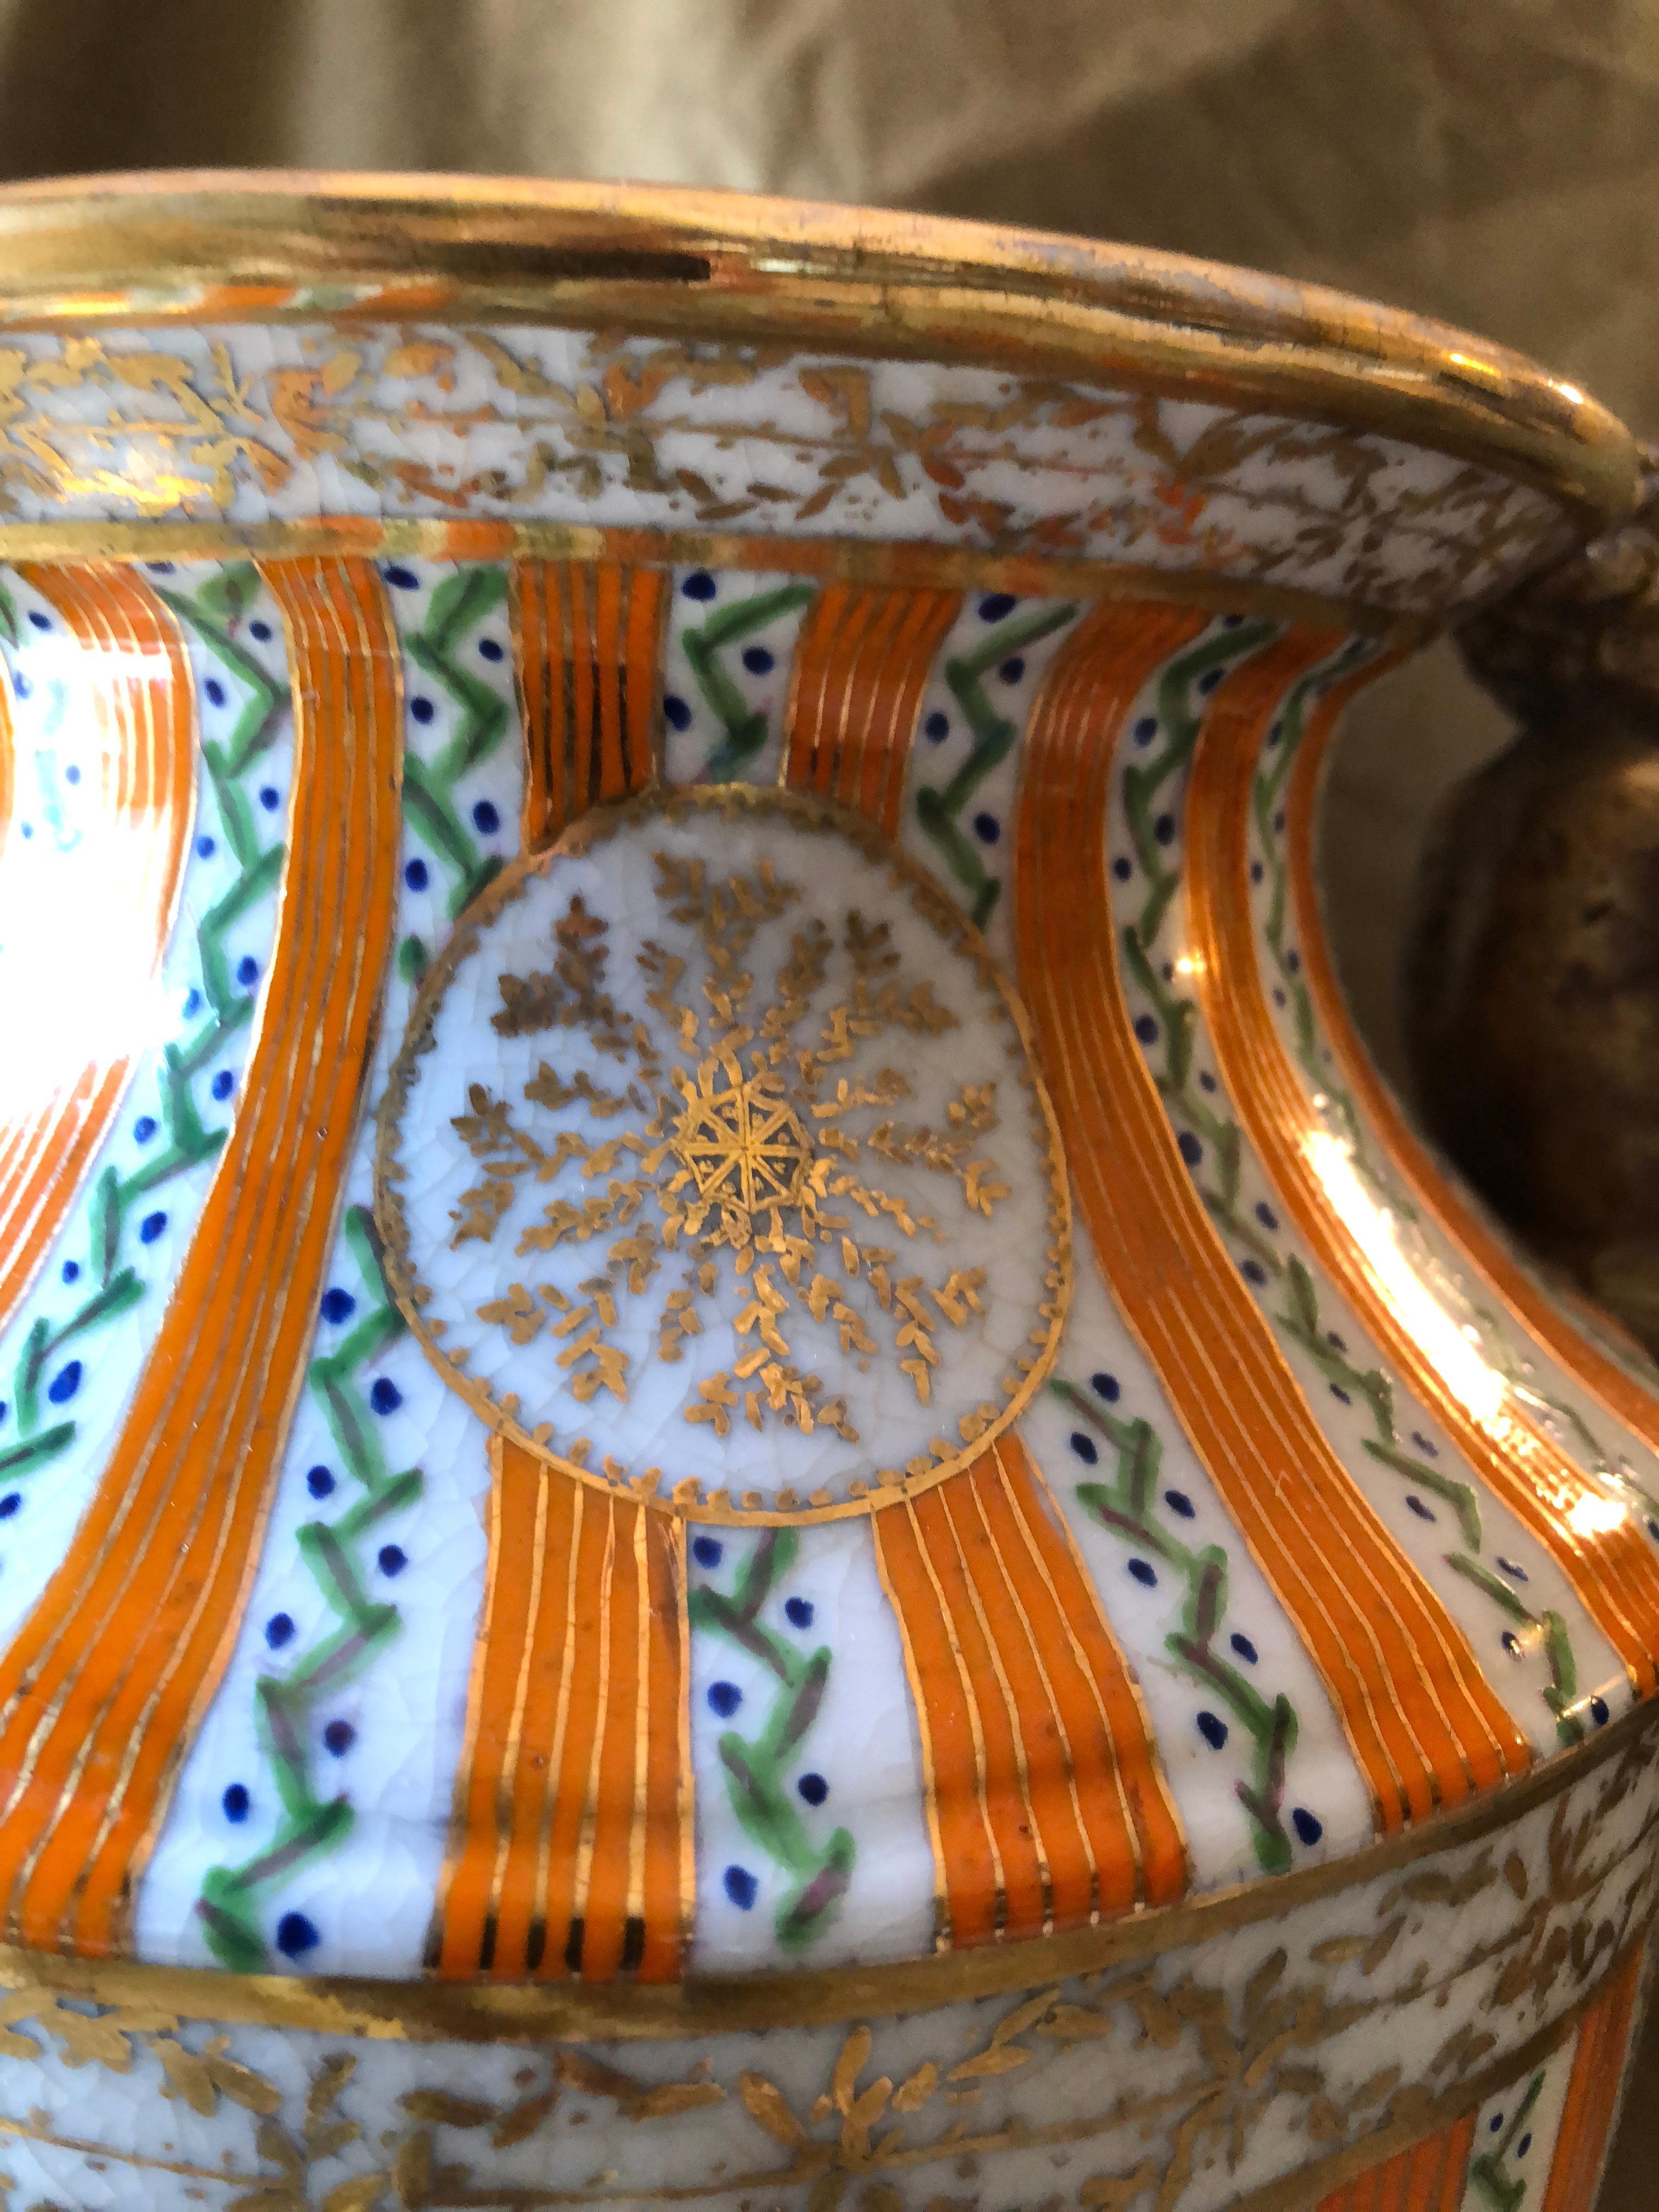 Large Porcelain Urn with Brass Handles and Base, Orange, White and Gold In Excellent Condition For Sale In Harrisburg, PA